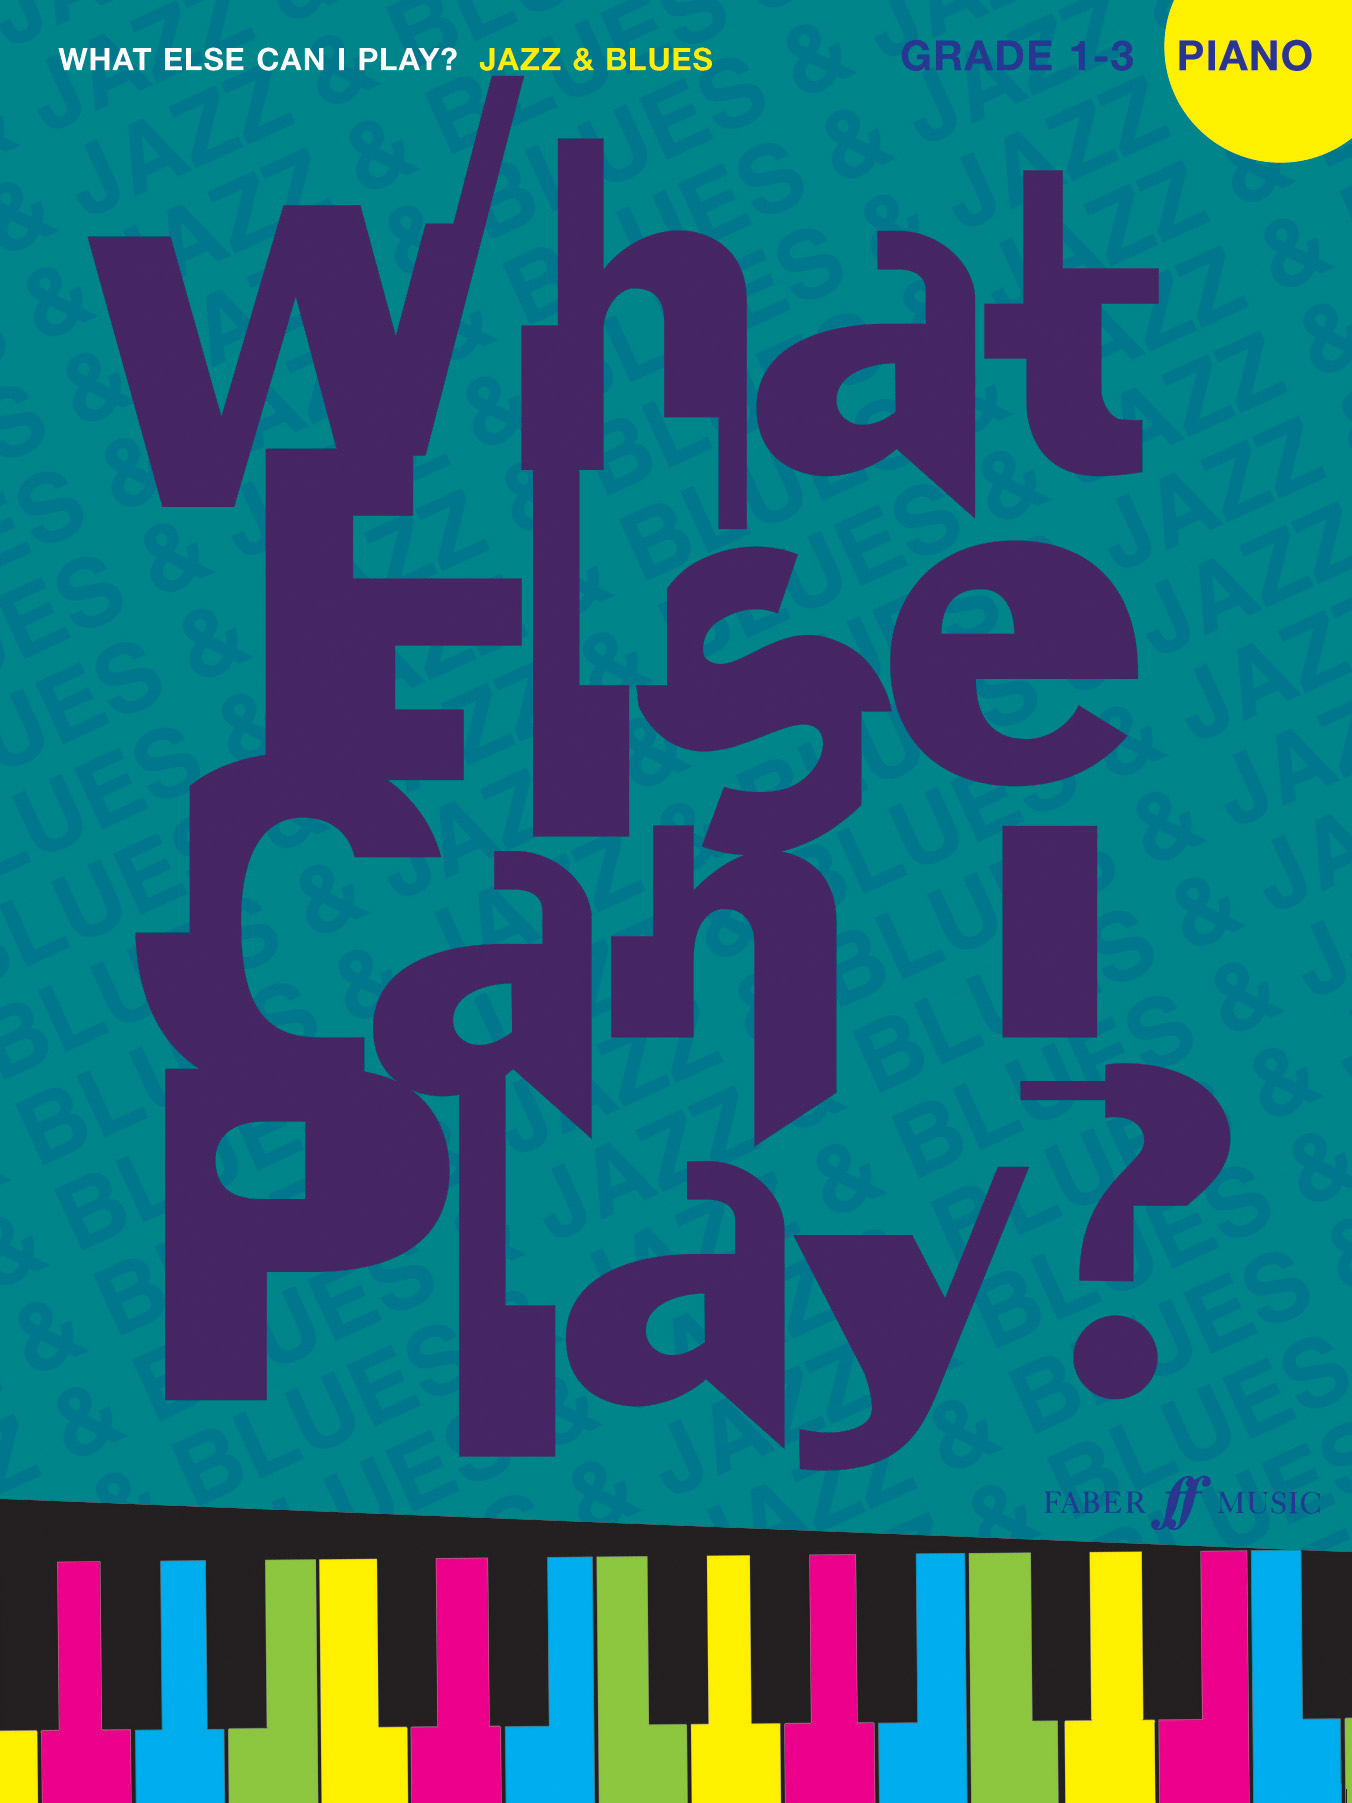 What Else Can I Play Jazz & Blues Grades 1-3 Piano Sheet Music Songbook